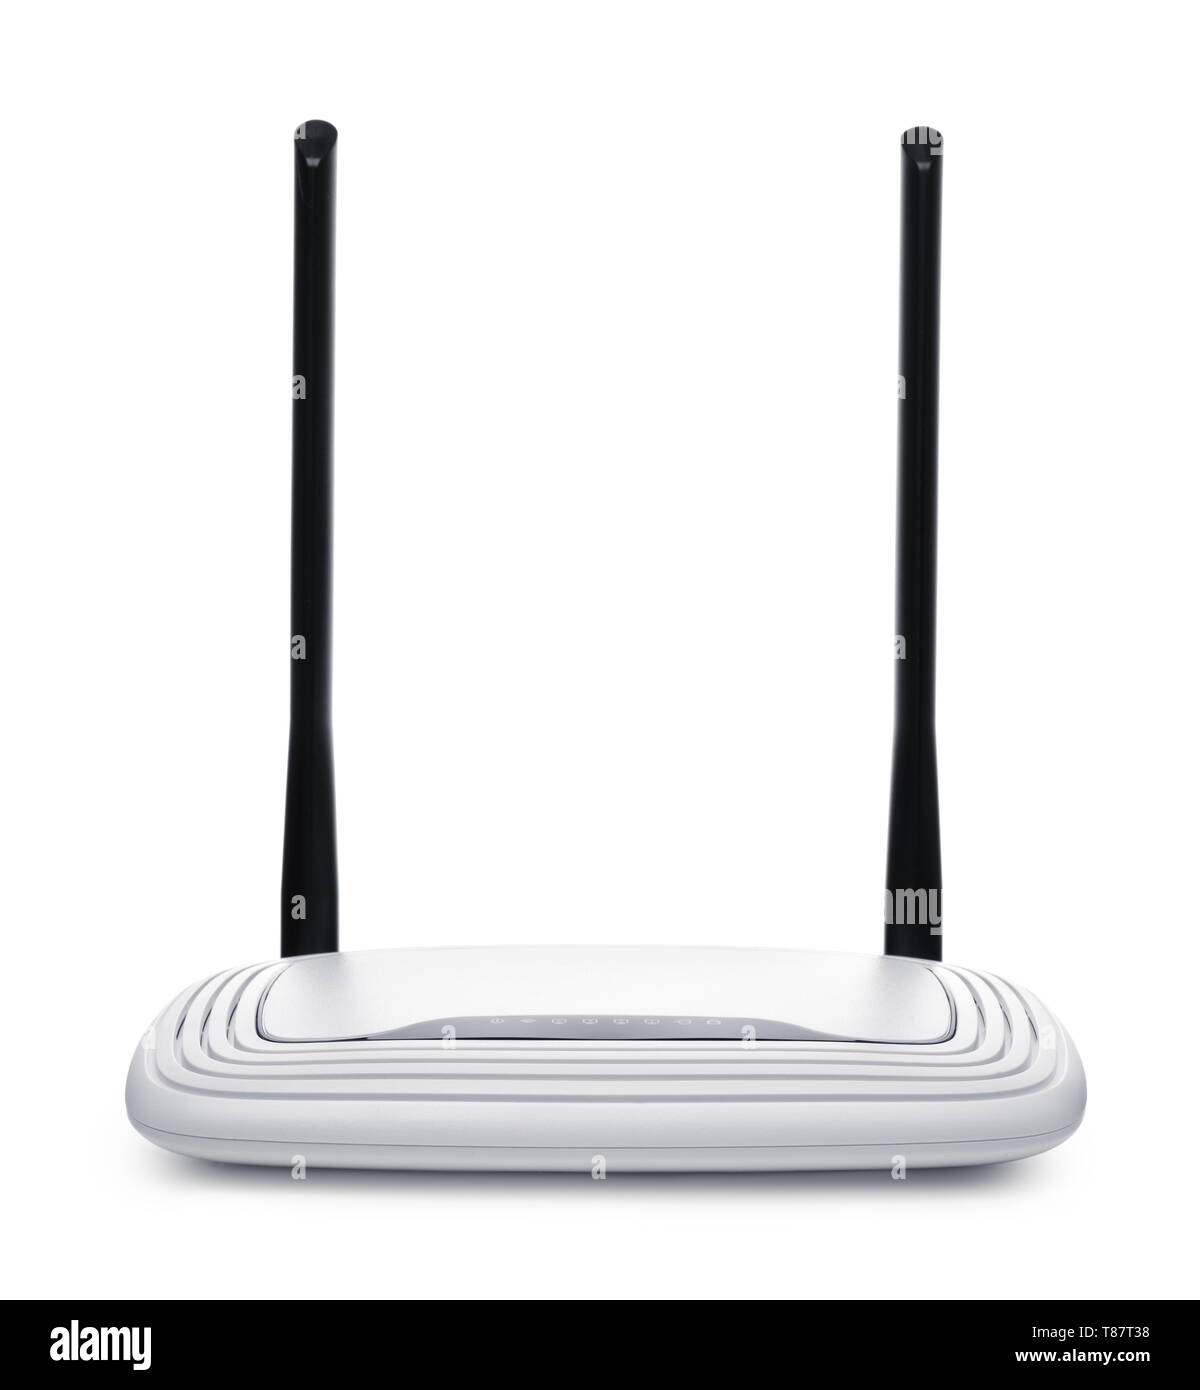 https://c8.alamy.com/comp/T87T38/front-view-of-wireless-wi-fi-router-isolated-on-white-T87T38.jpg